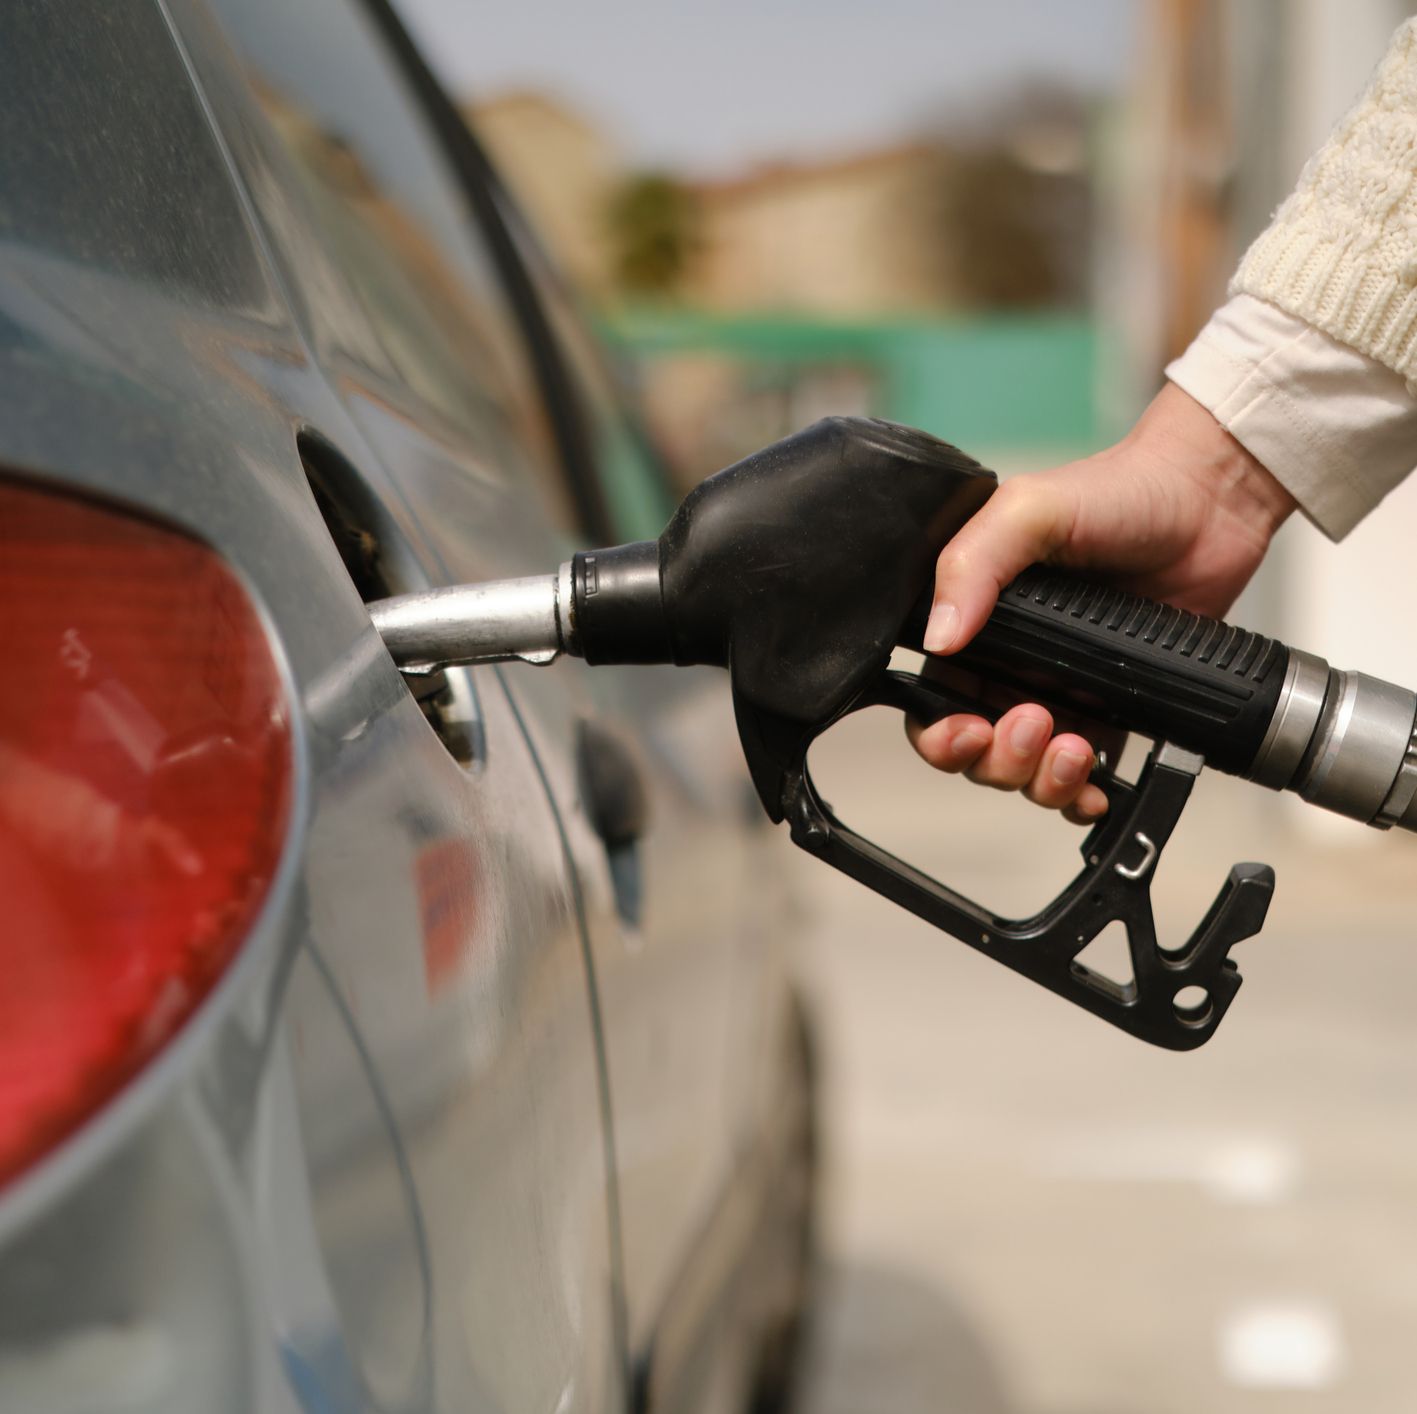 Why We Love the Smell of Gasoline So Much, According to Science